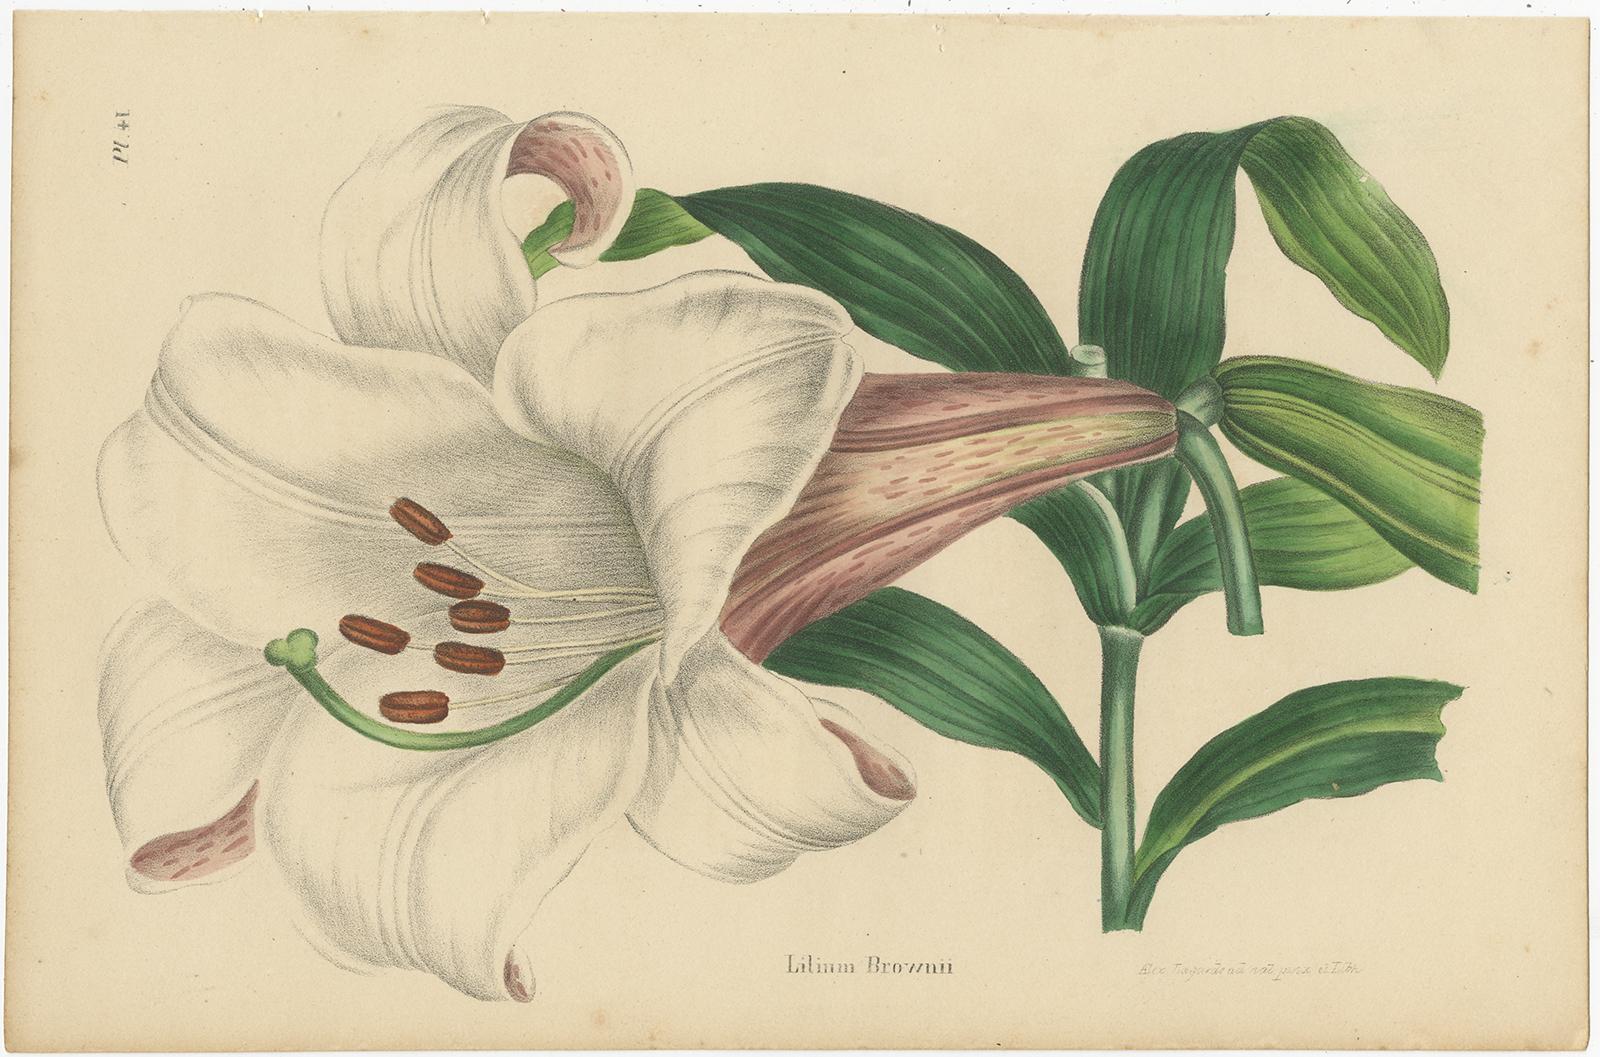 Set of two antique botany prints titled 'Lilium Brownii, Clerodendron Kaempferi'. It depicts the Lilium brownii (a species of lily native to Mainland China) and the Clerodendrum japonicum shrub. These prints originate from volume 1 of 'Annales de la